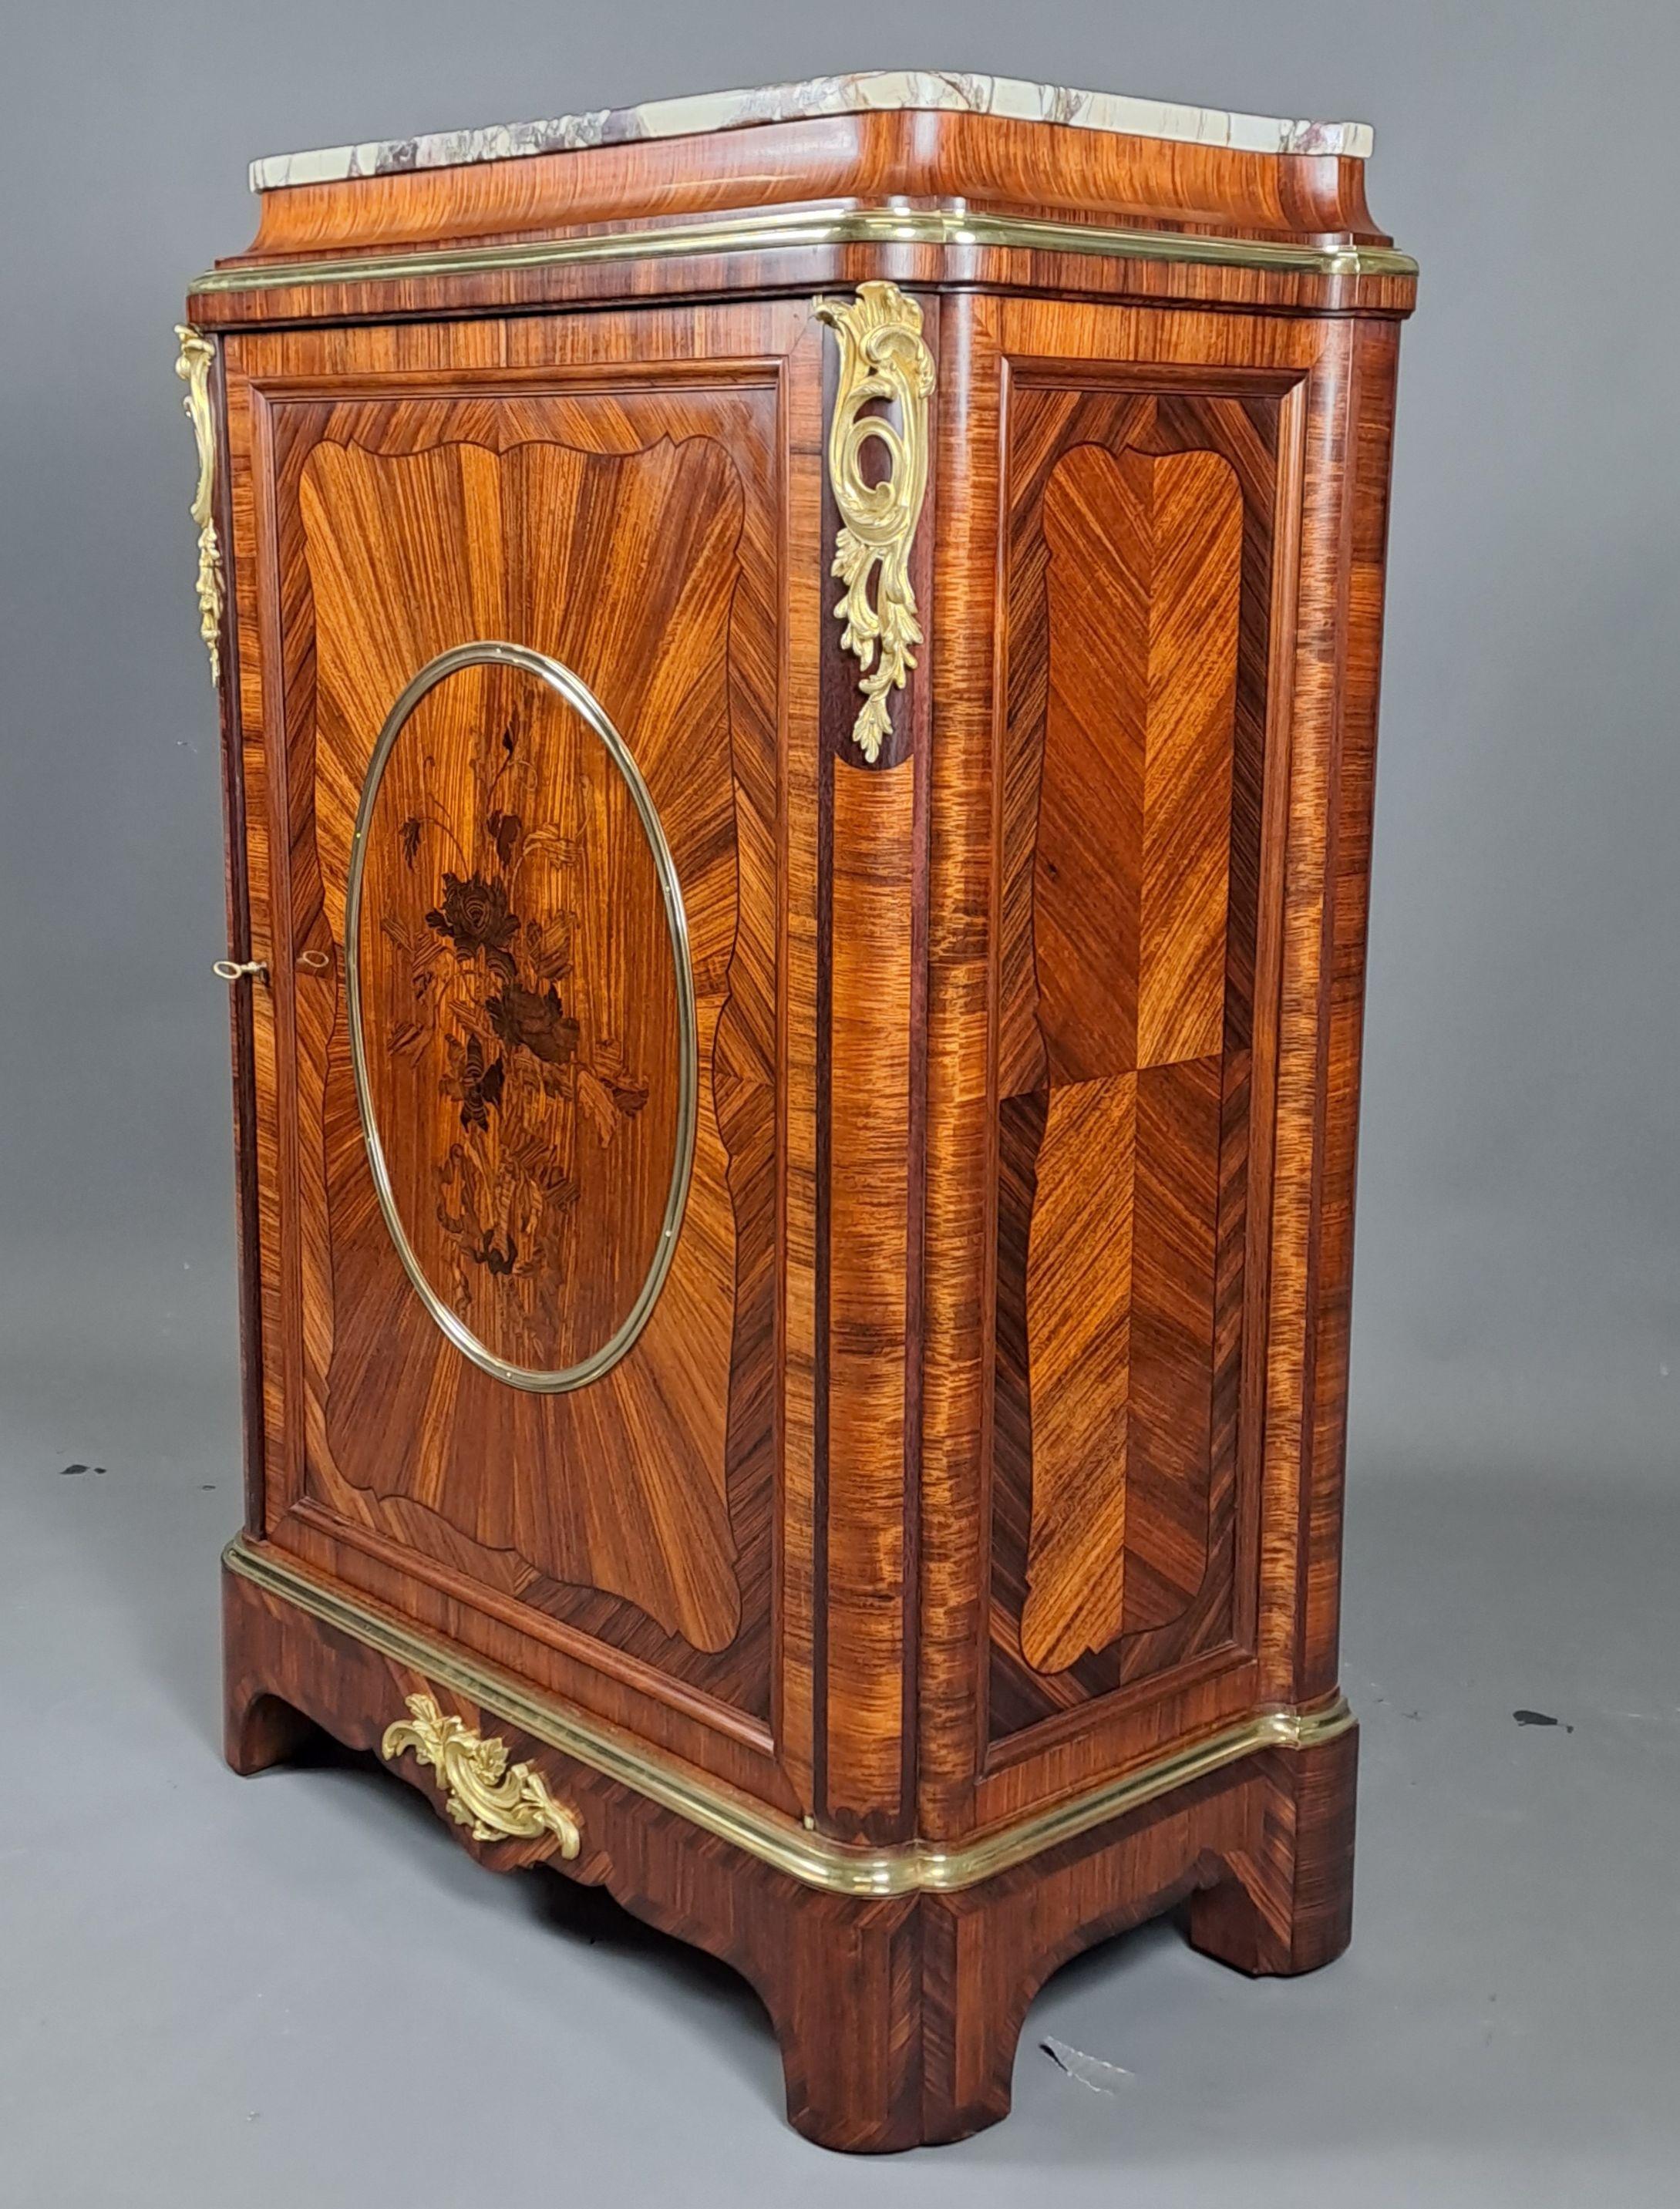 Rosewood Napoleon III Meuble d'Appui By Gervais-maximilien Durand In Paris For Sale